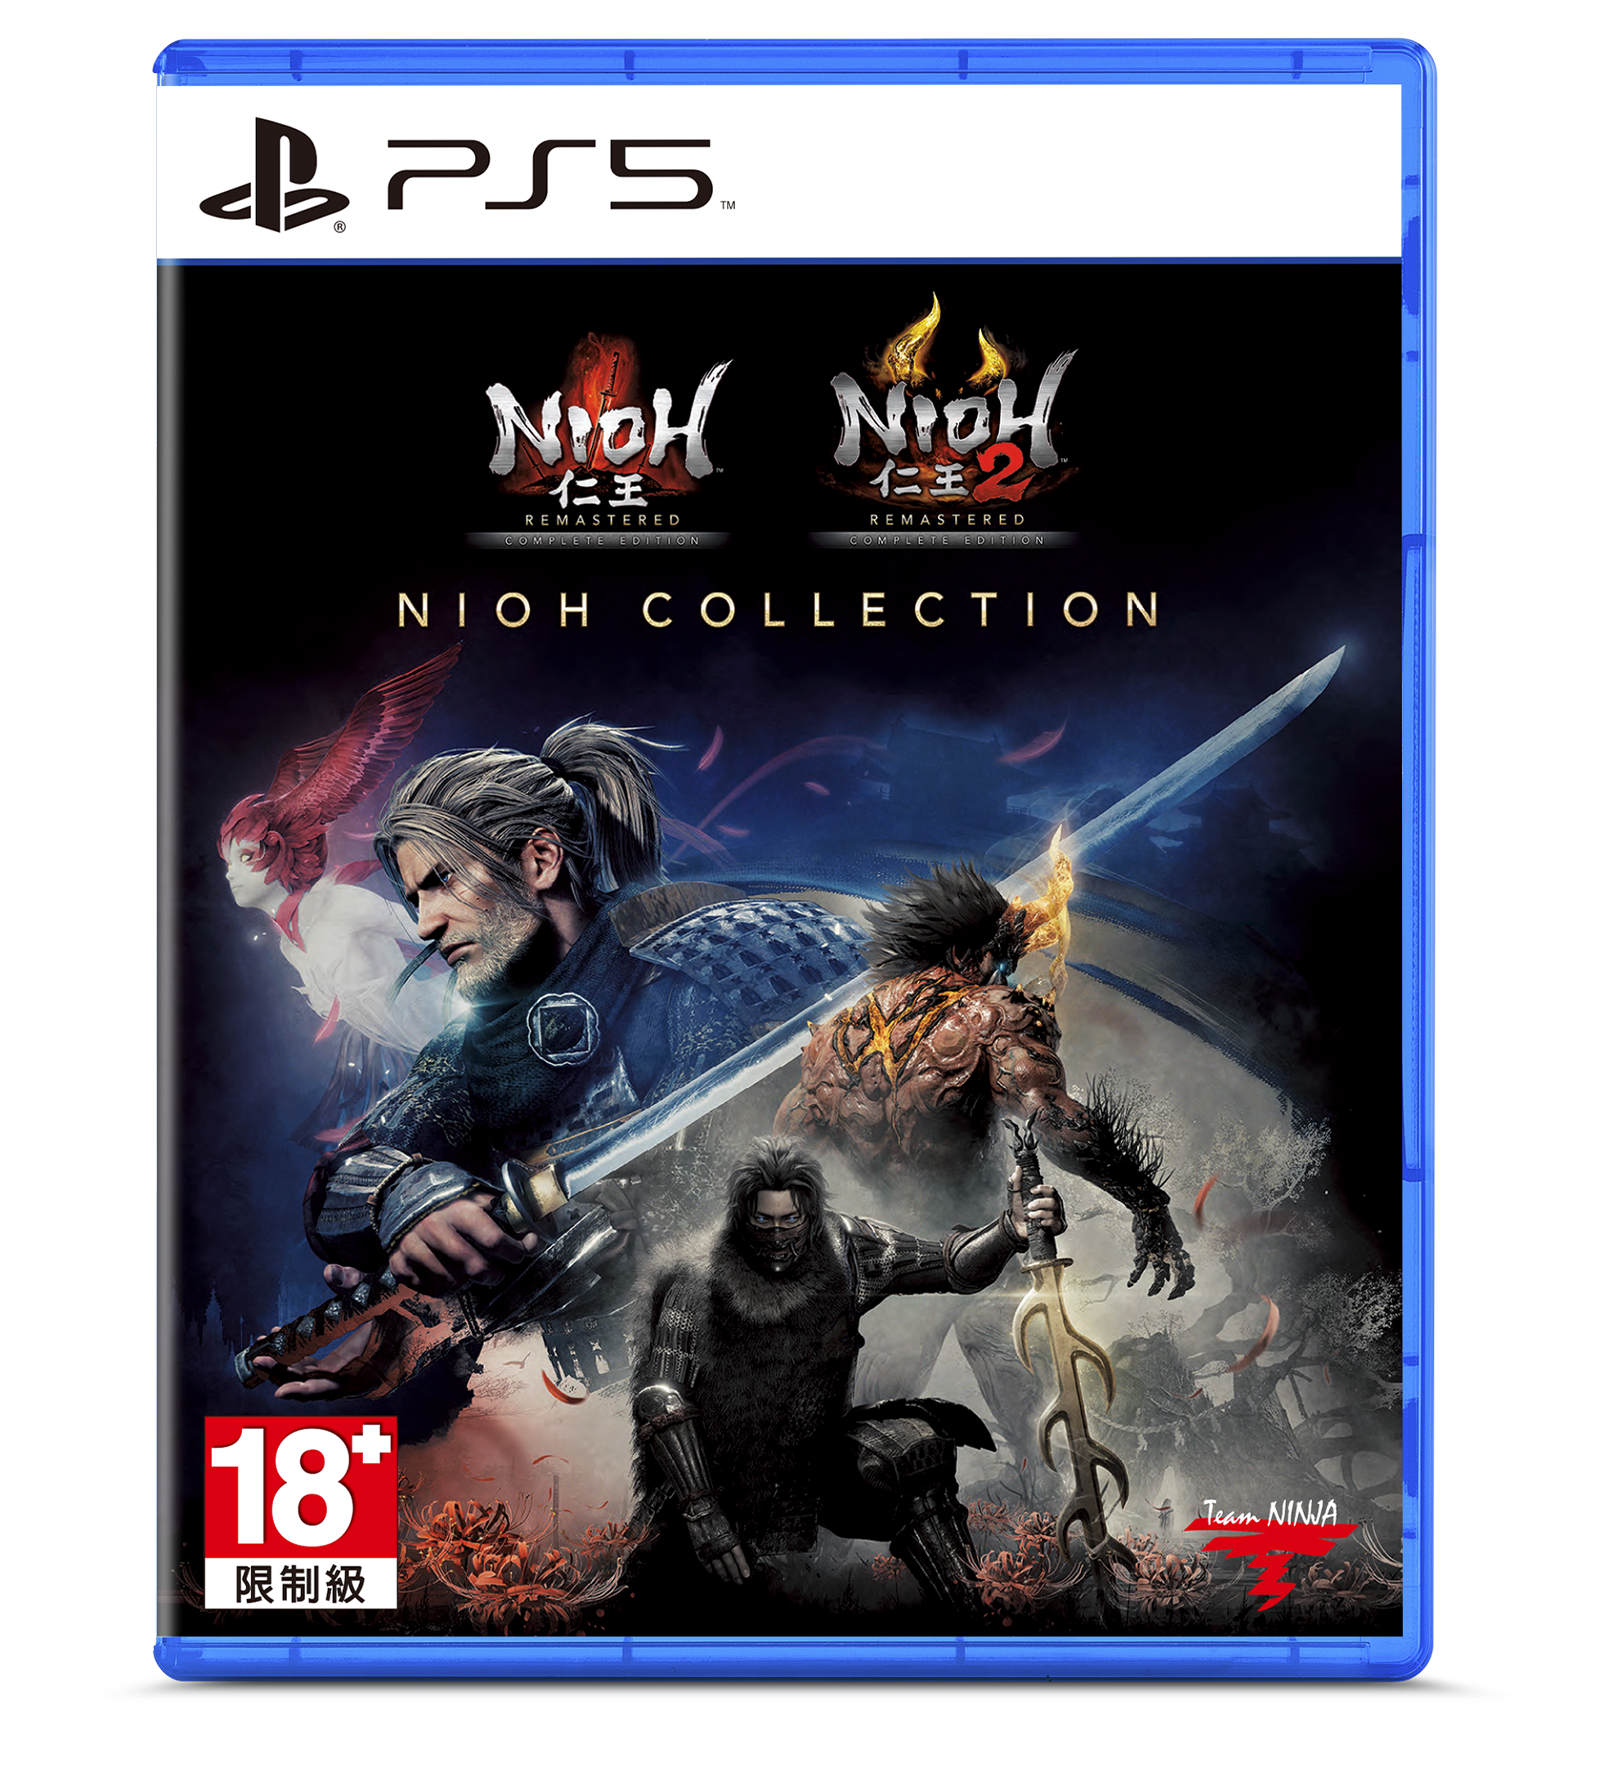 Nioh Collection Play2022 deal